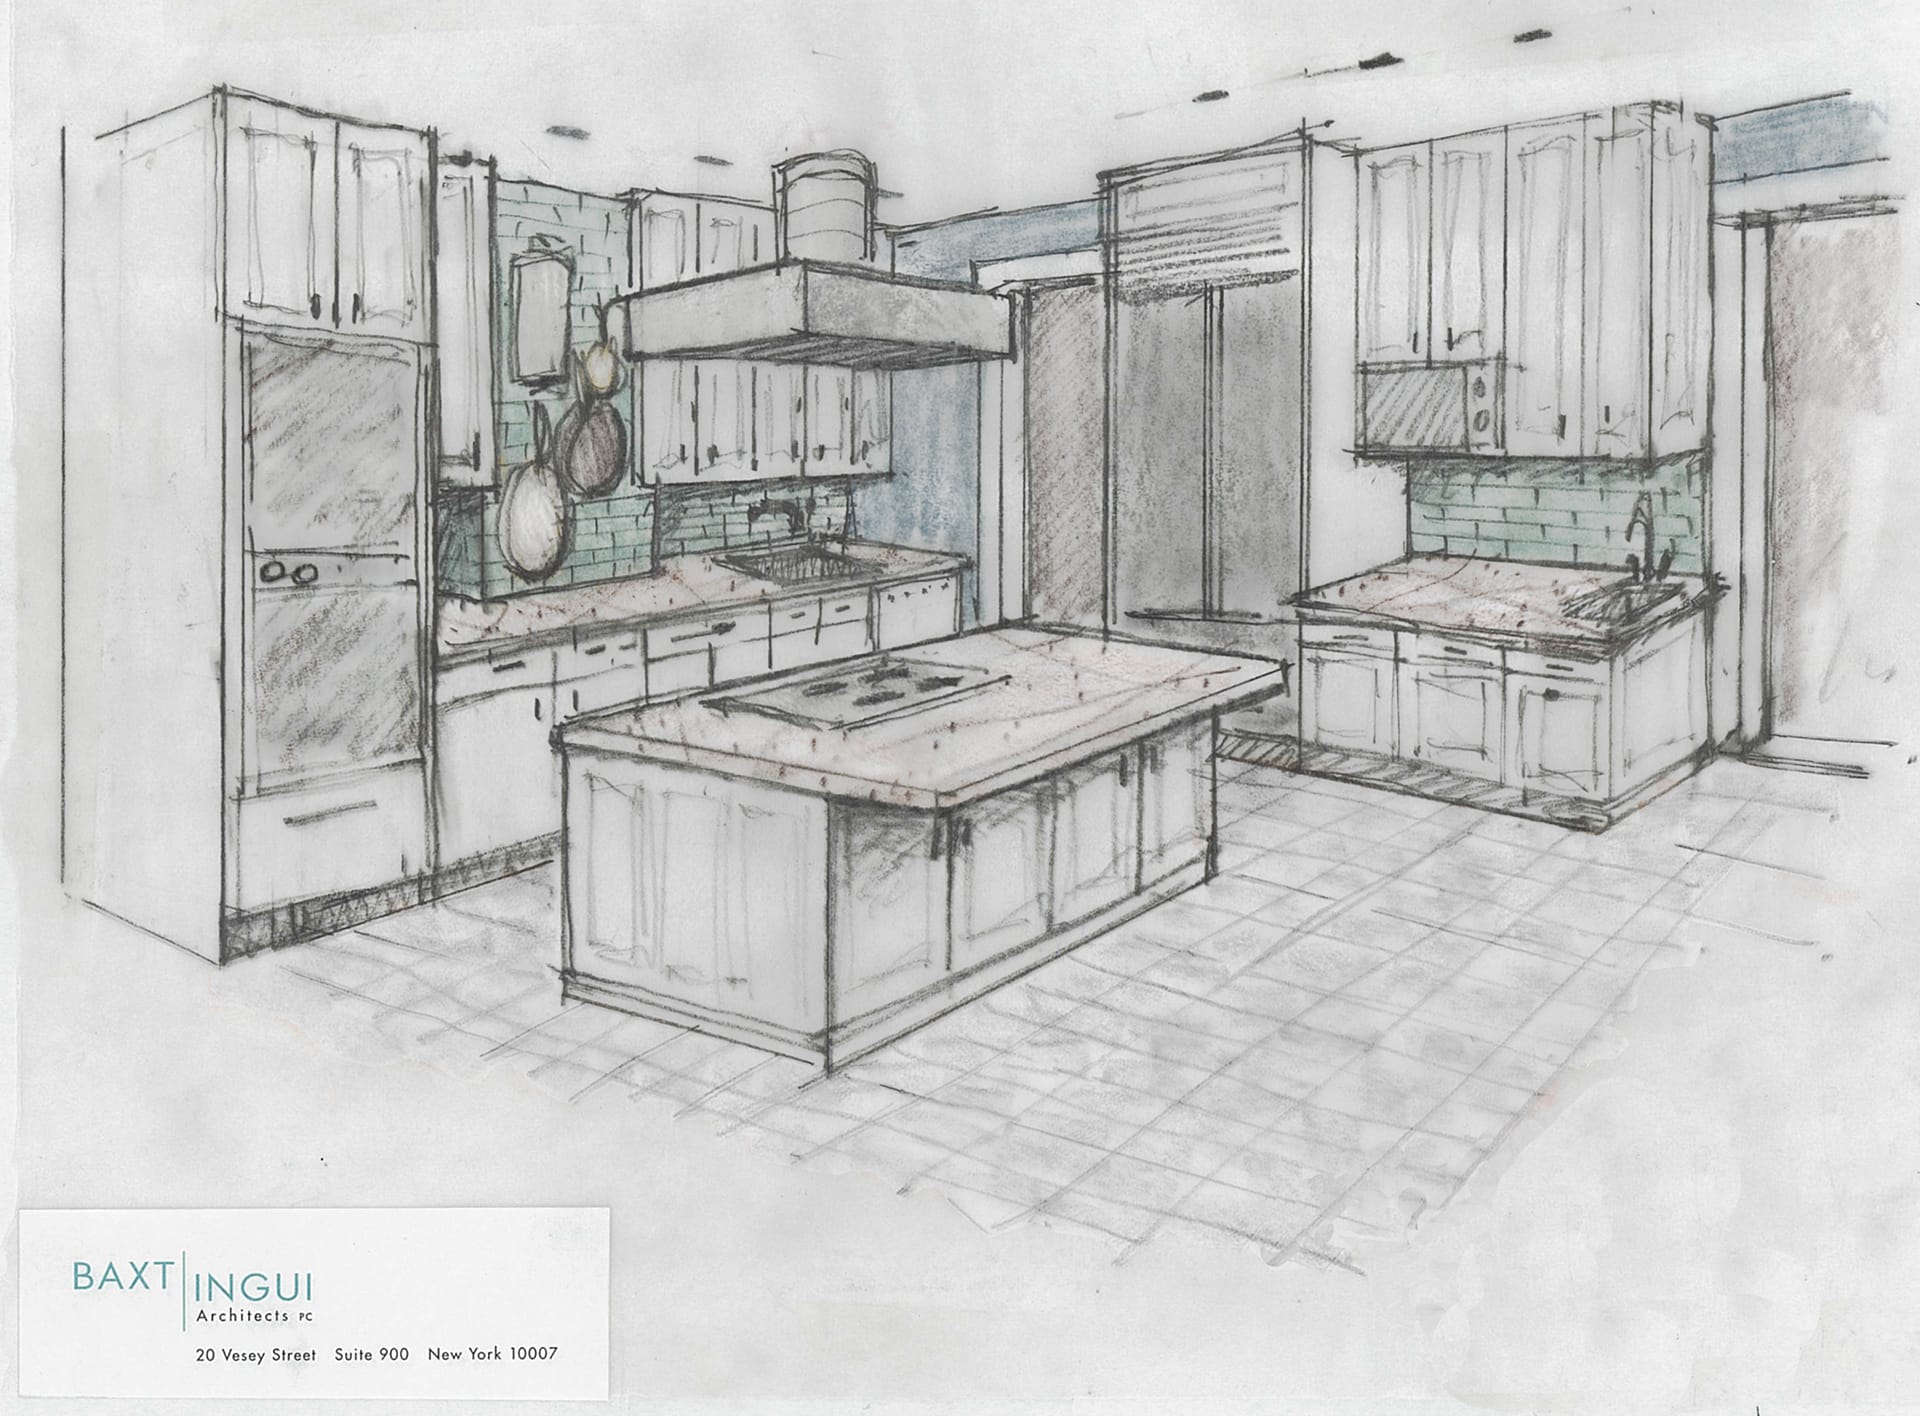 Scan of a pencil sketch detailing a concept for a Brooklyn kitchen. Custom cabinets, island with stove, and range hood above.